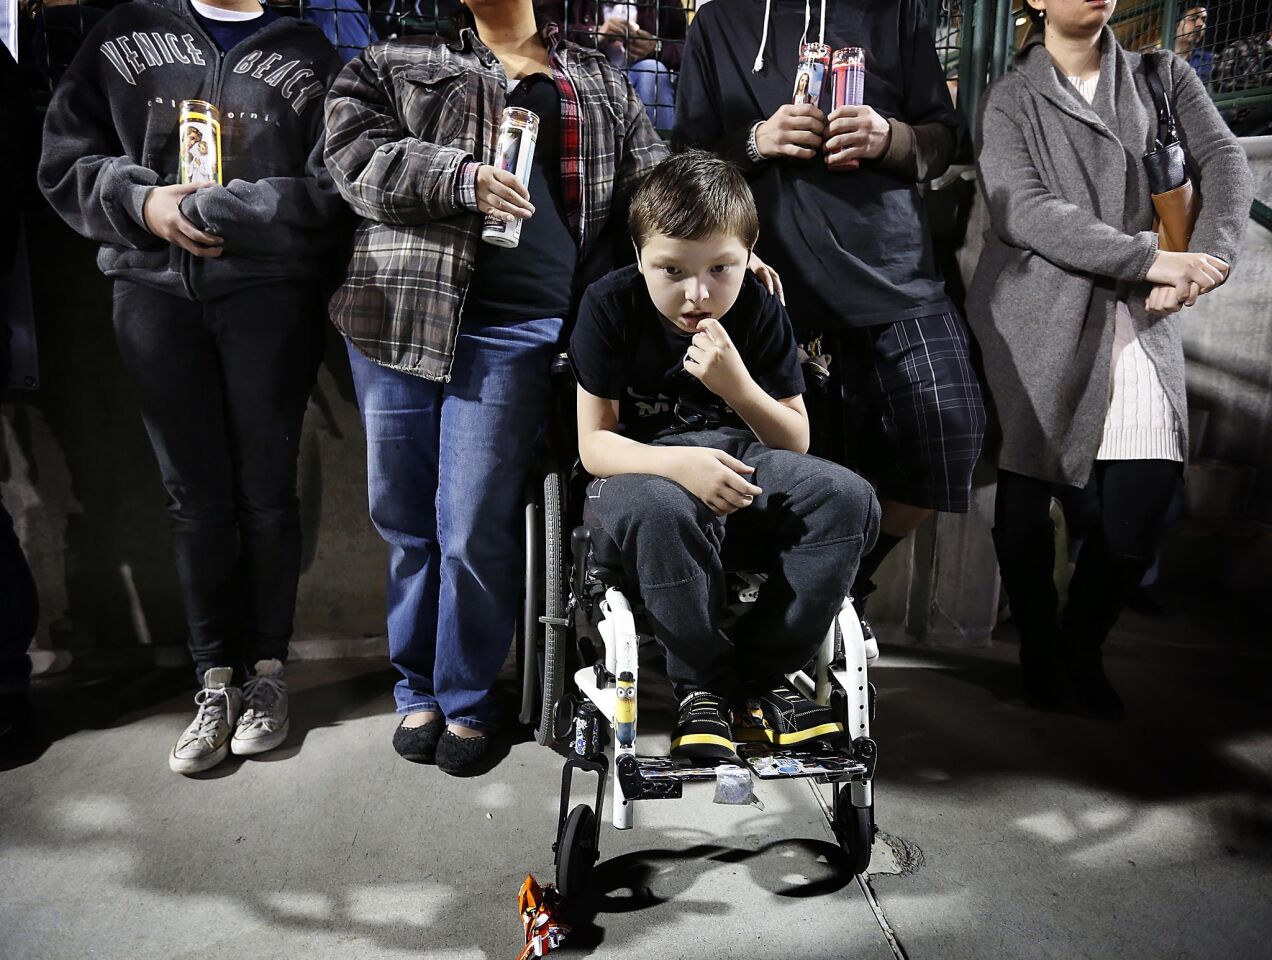 Angel Meler-Baumgartner 11, who was a member of the Inland Regional Center, where the shooting occurred, attends a vigil at San Manuel Stadium for the victims.